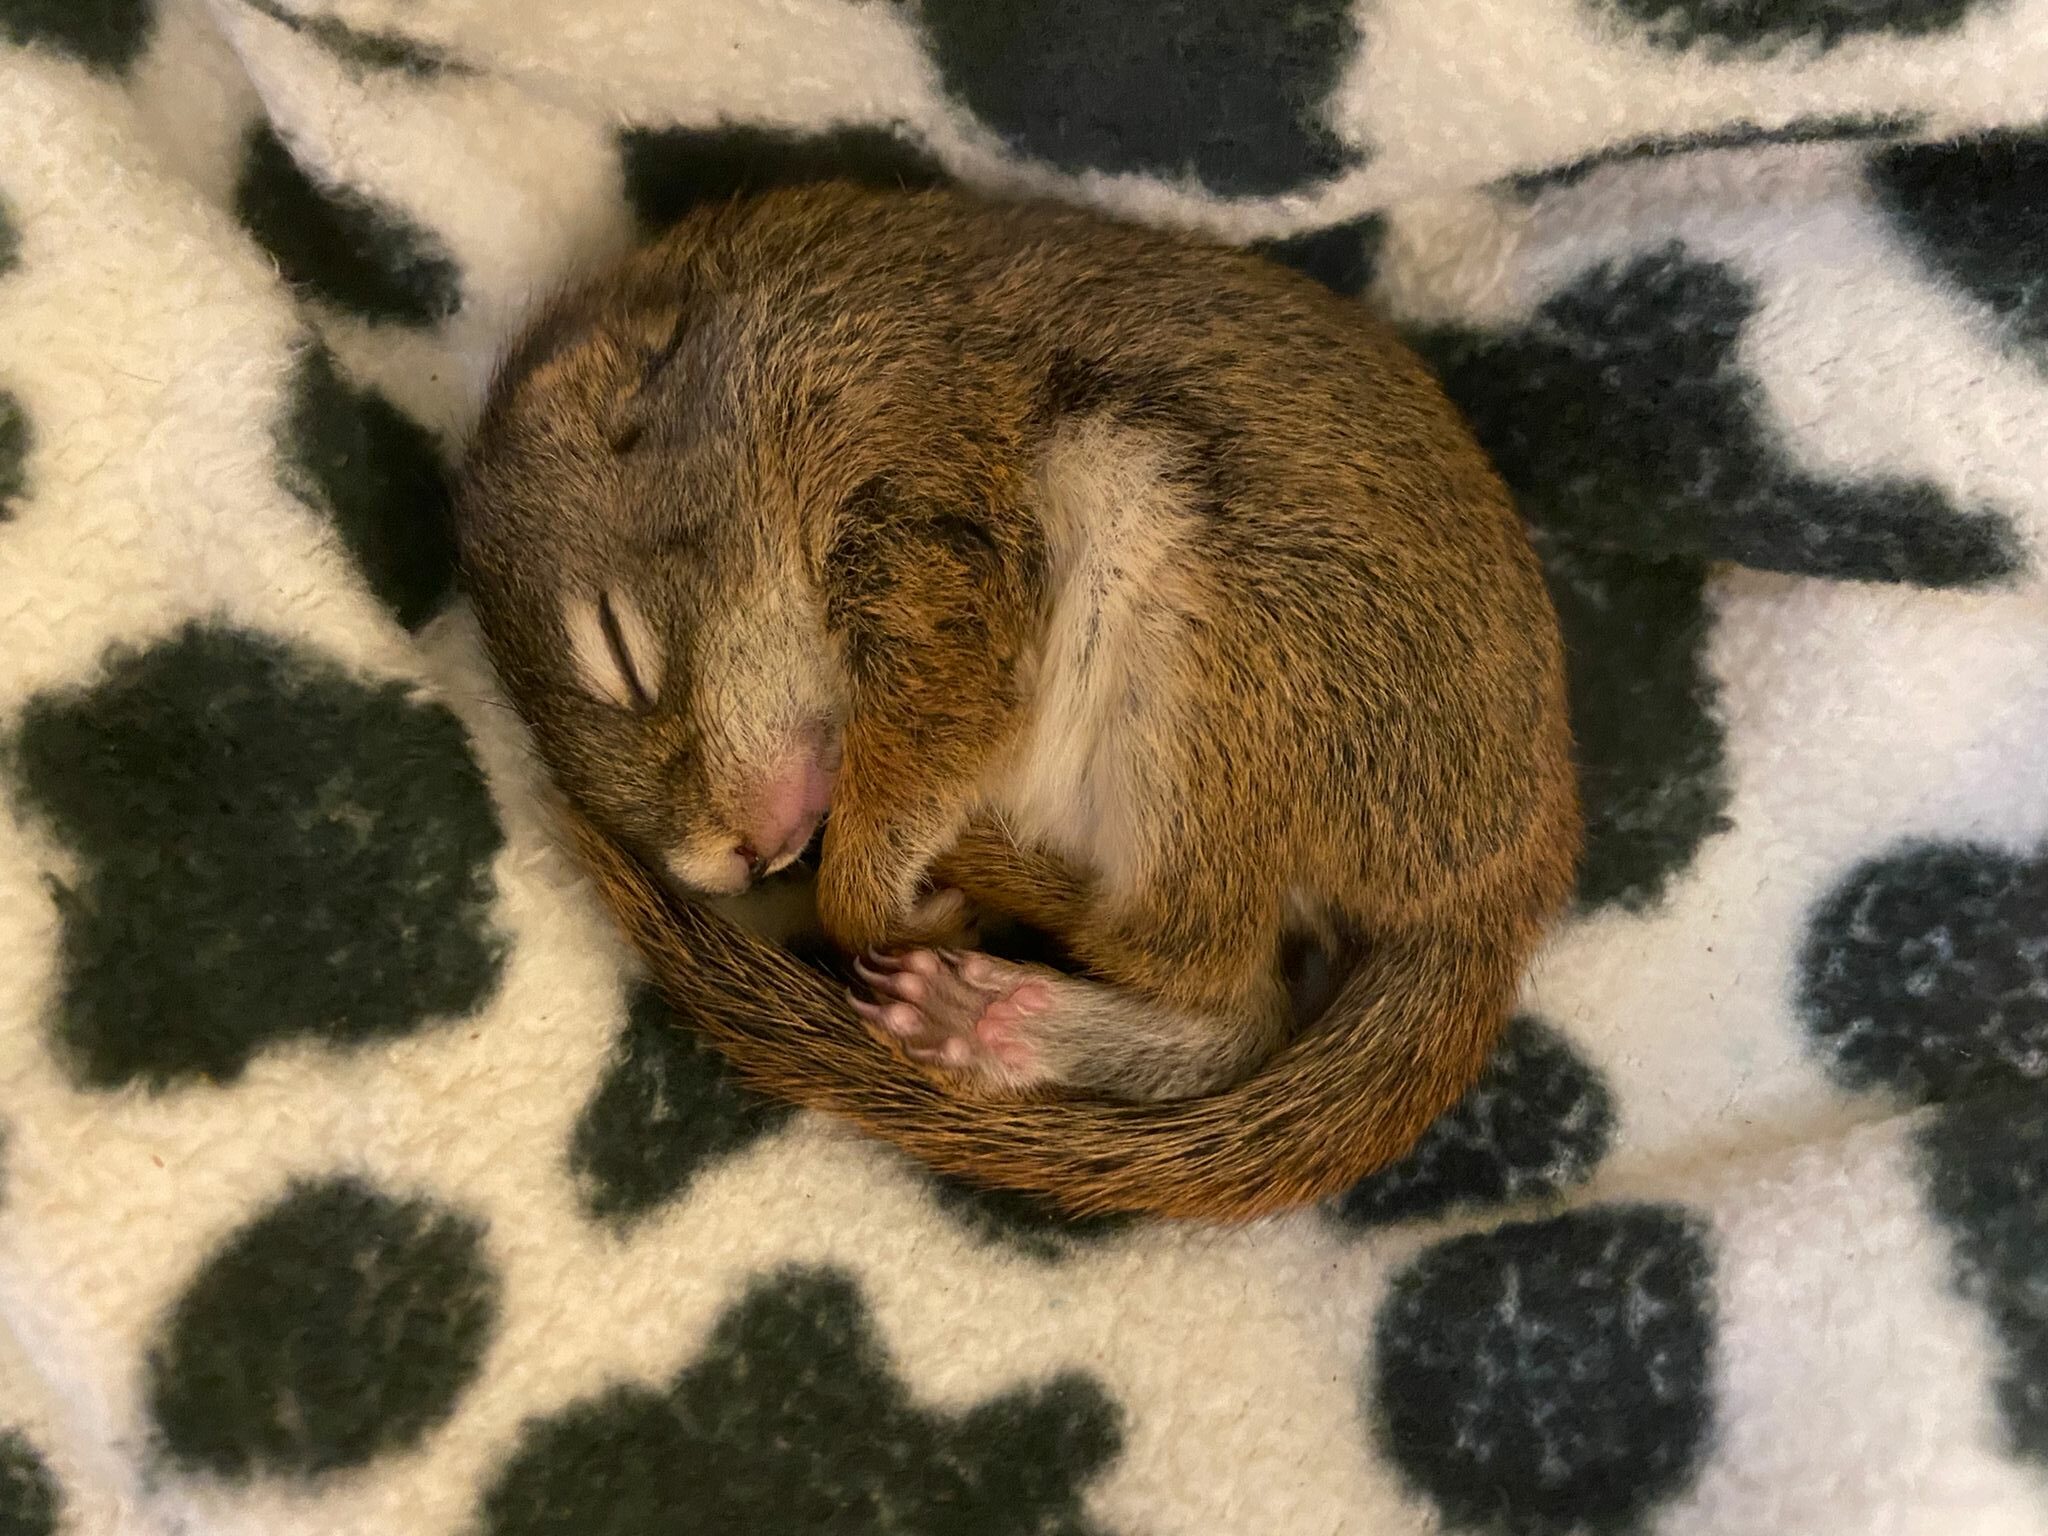 Baby red squirrel curled up on a spotted blanket